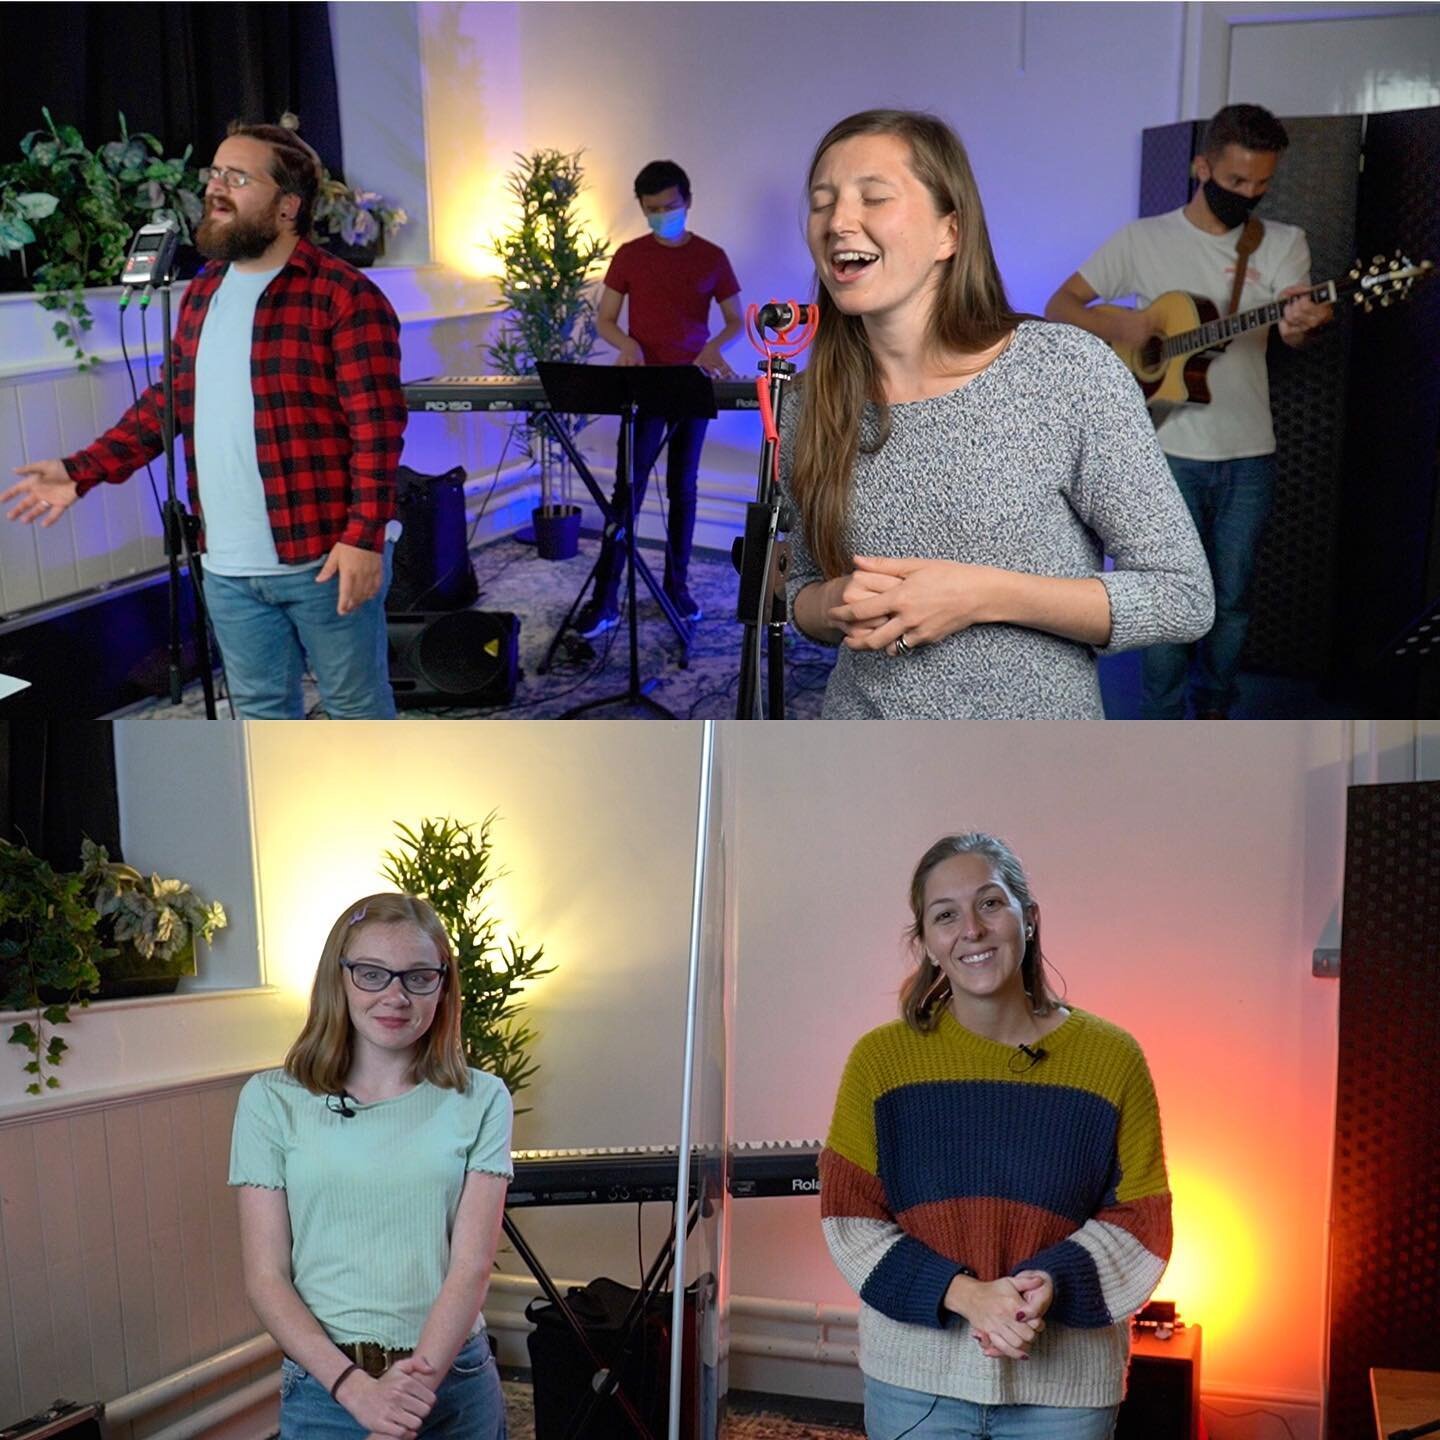 More of our young people and team smashing it in The Evening Service this week! Definitely not one to miss.